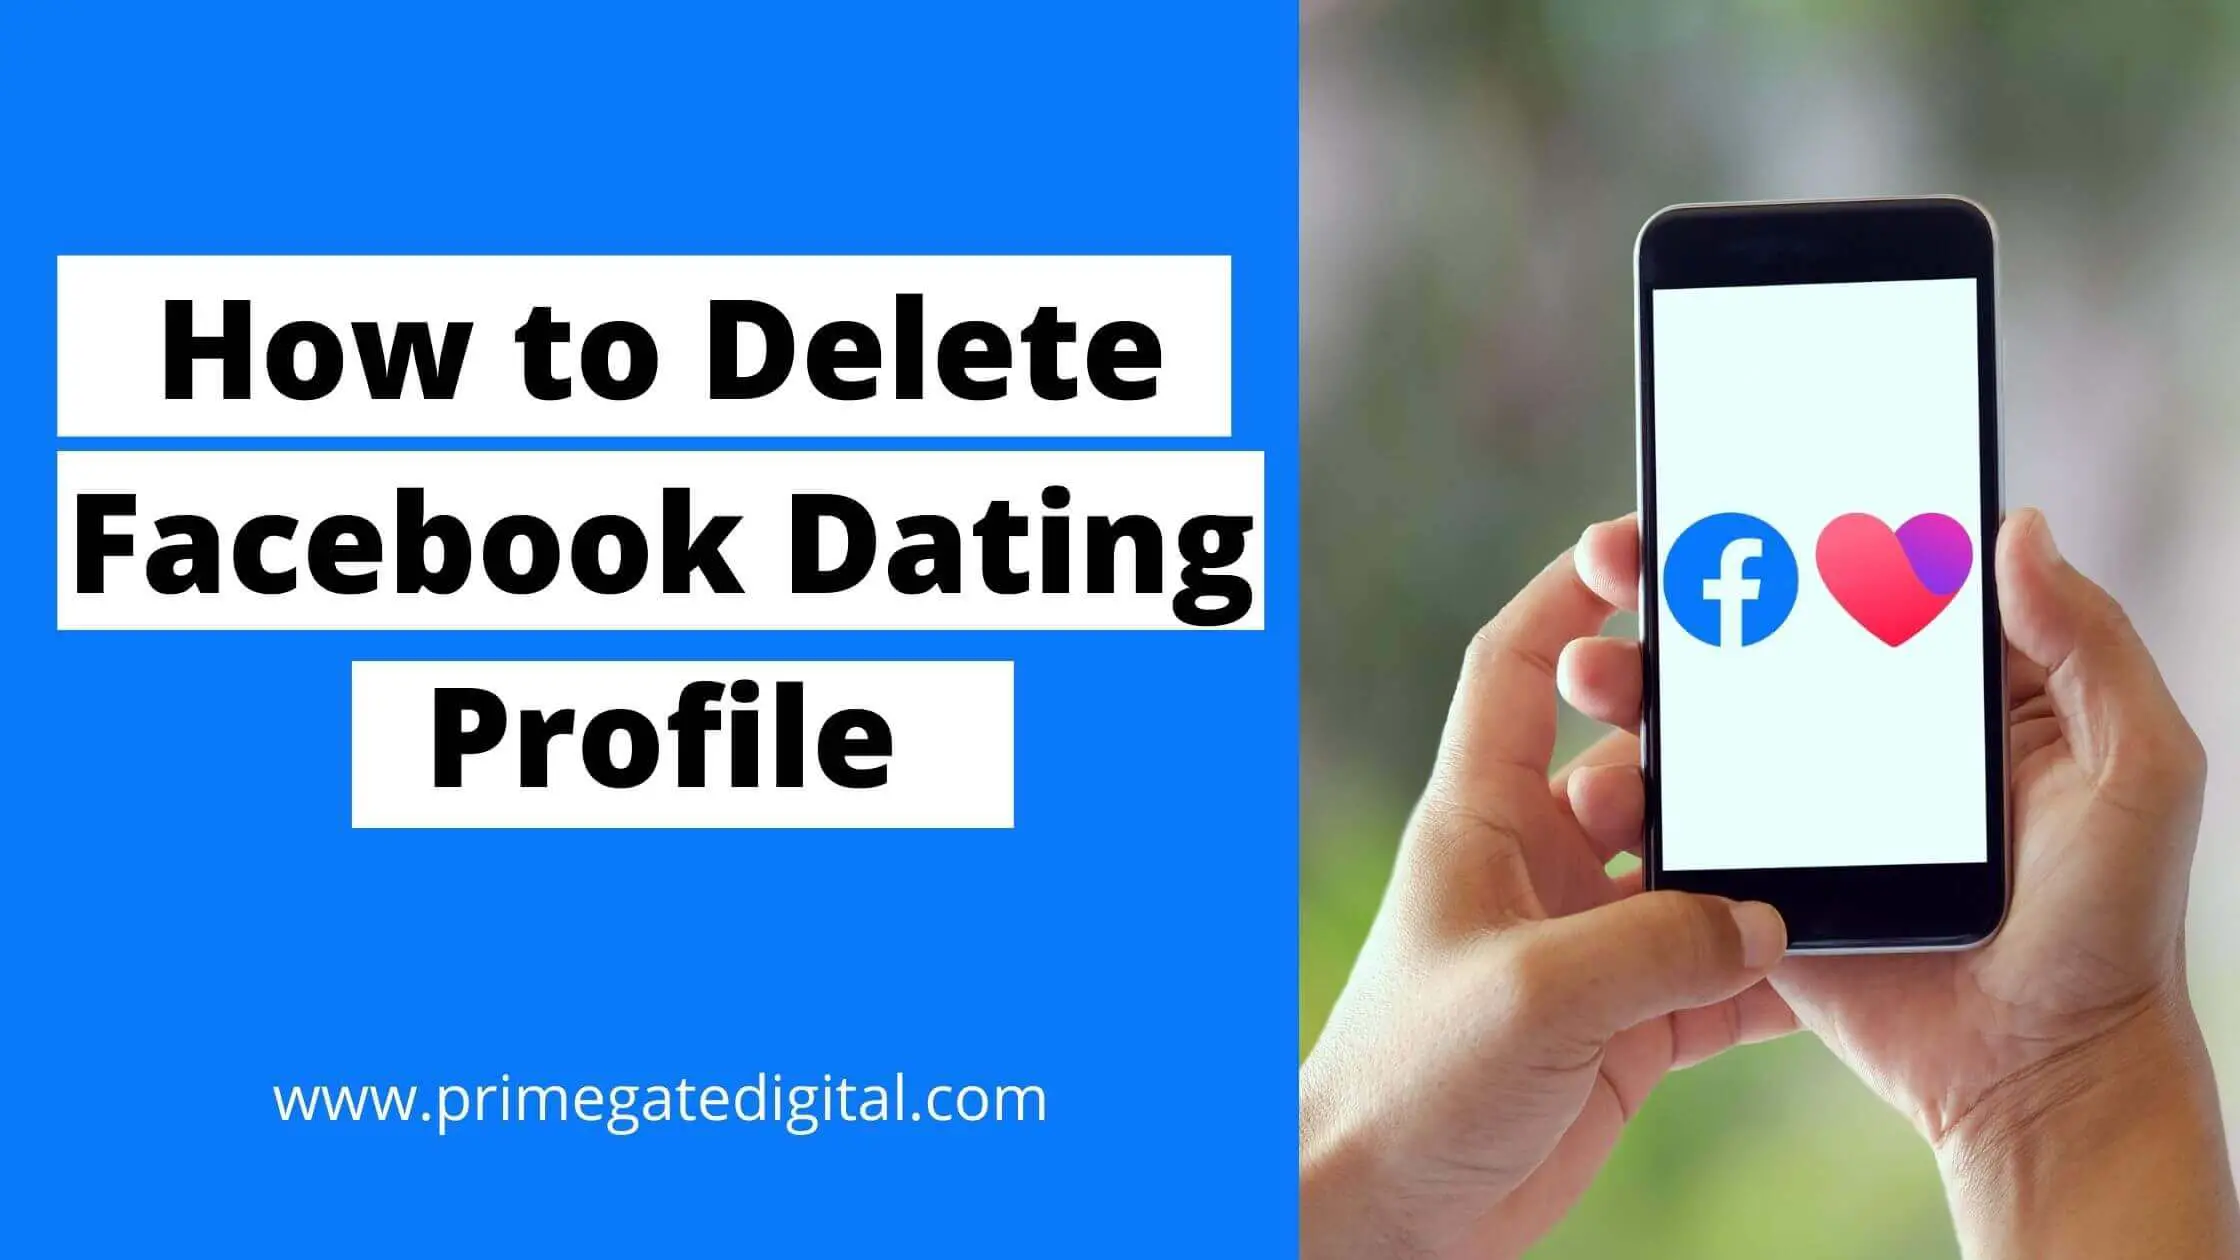 How to Delete Facebook Dating Profile